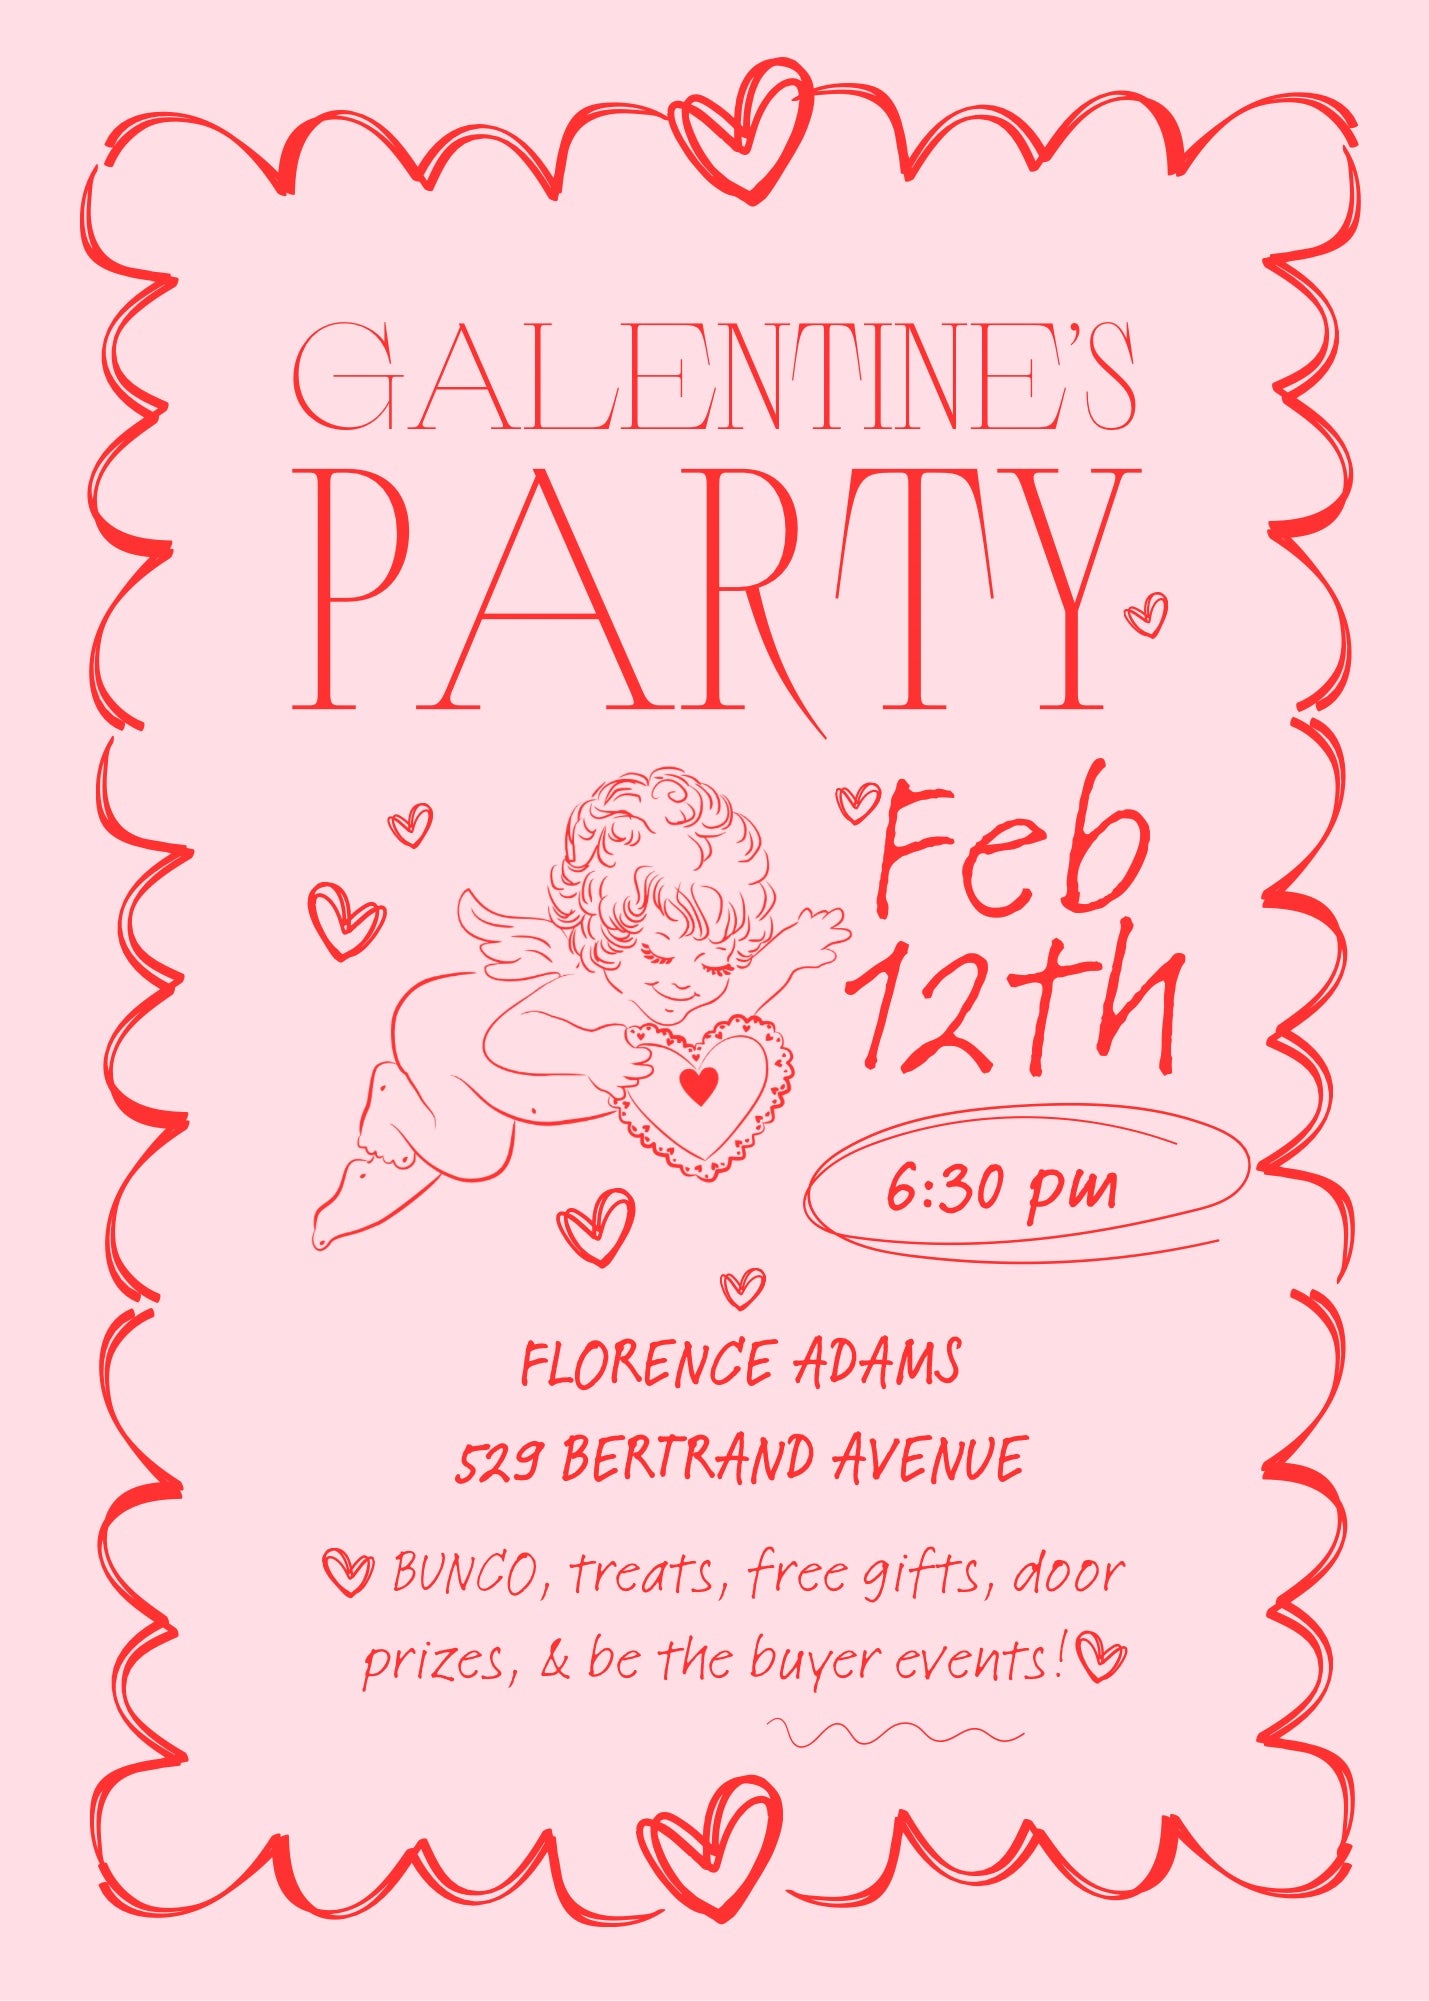 Galentine’s Party 02/12